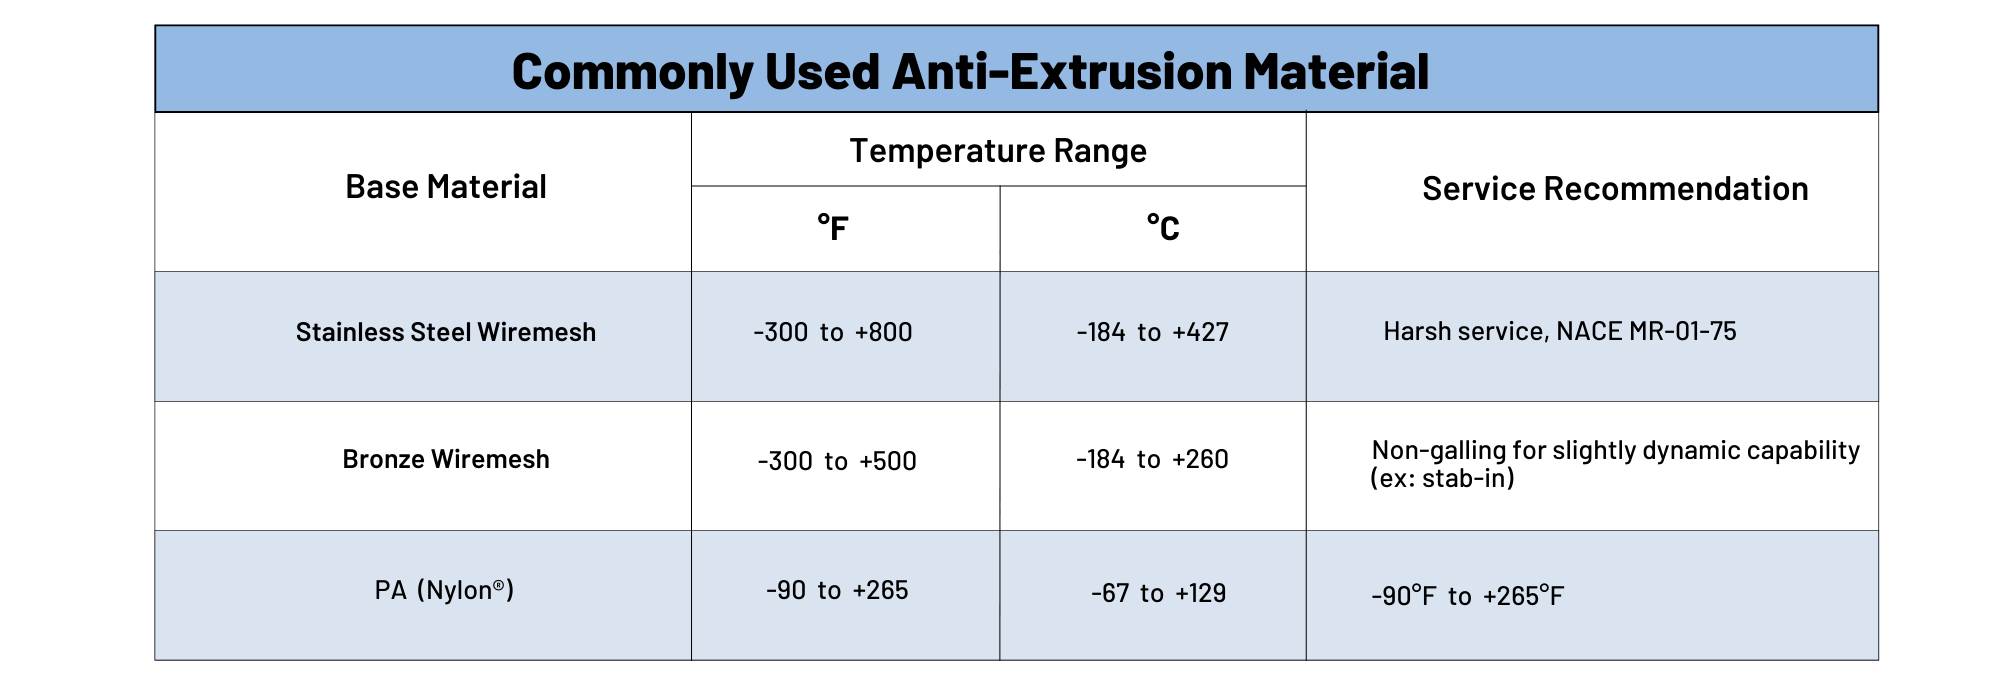 Commonly Used Anti-Extrusion Material Chart